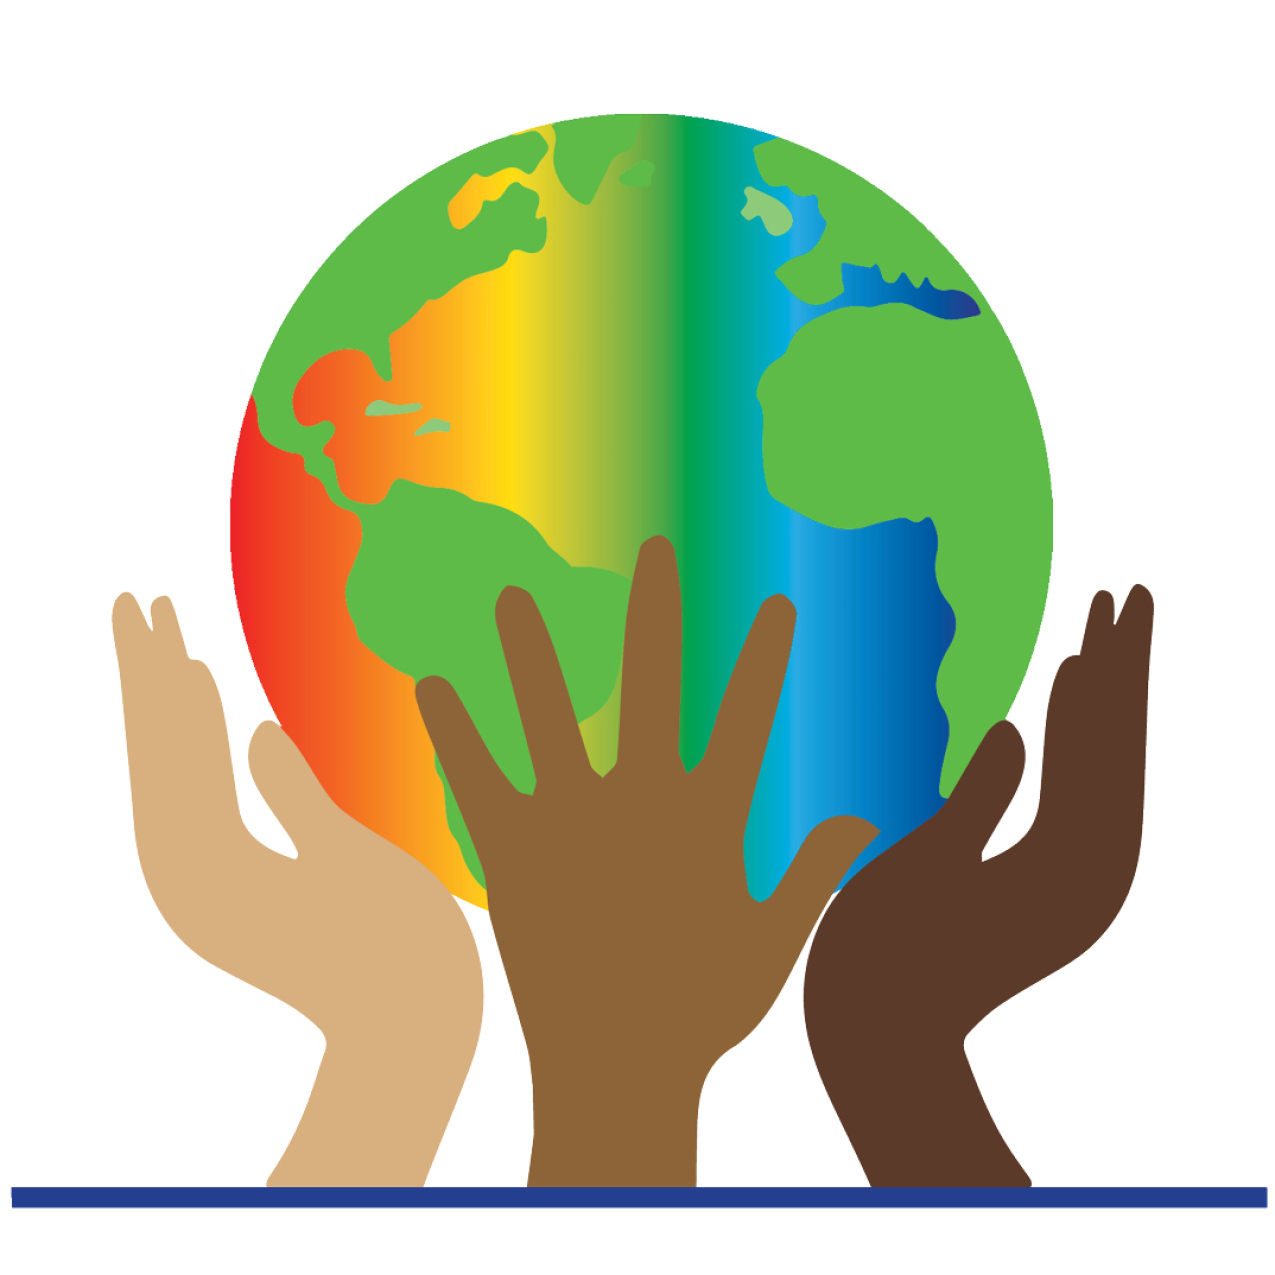 A graphic of human hands holding up a globe. A NOAA logo is in the bottom left corner of the image. Text: Planet Stewards.